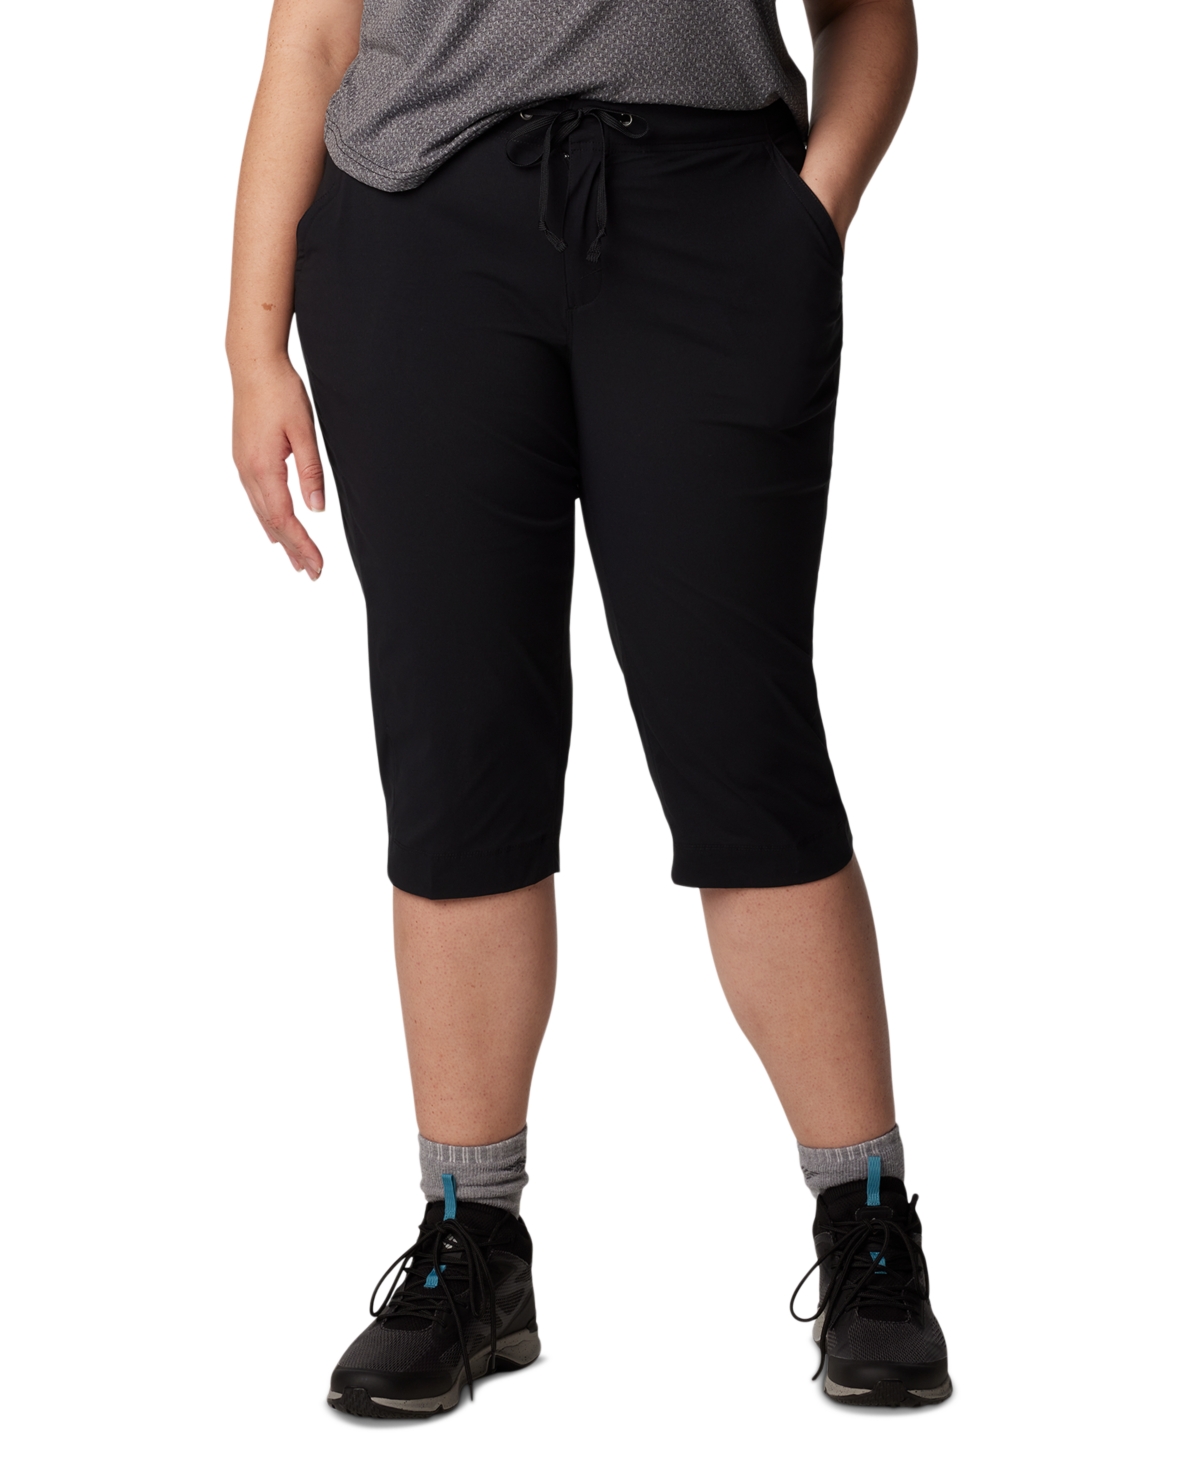 Plus Size Anytime Outdoor Capri Pants - Nocturnal